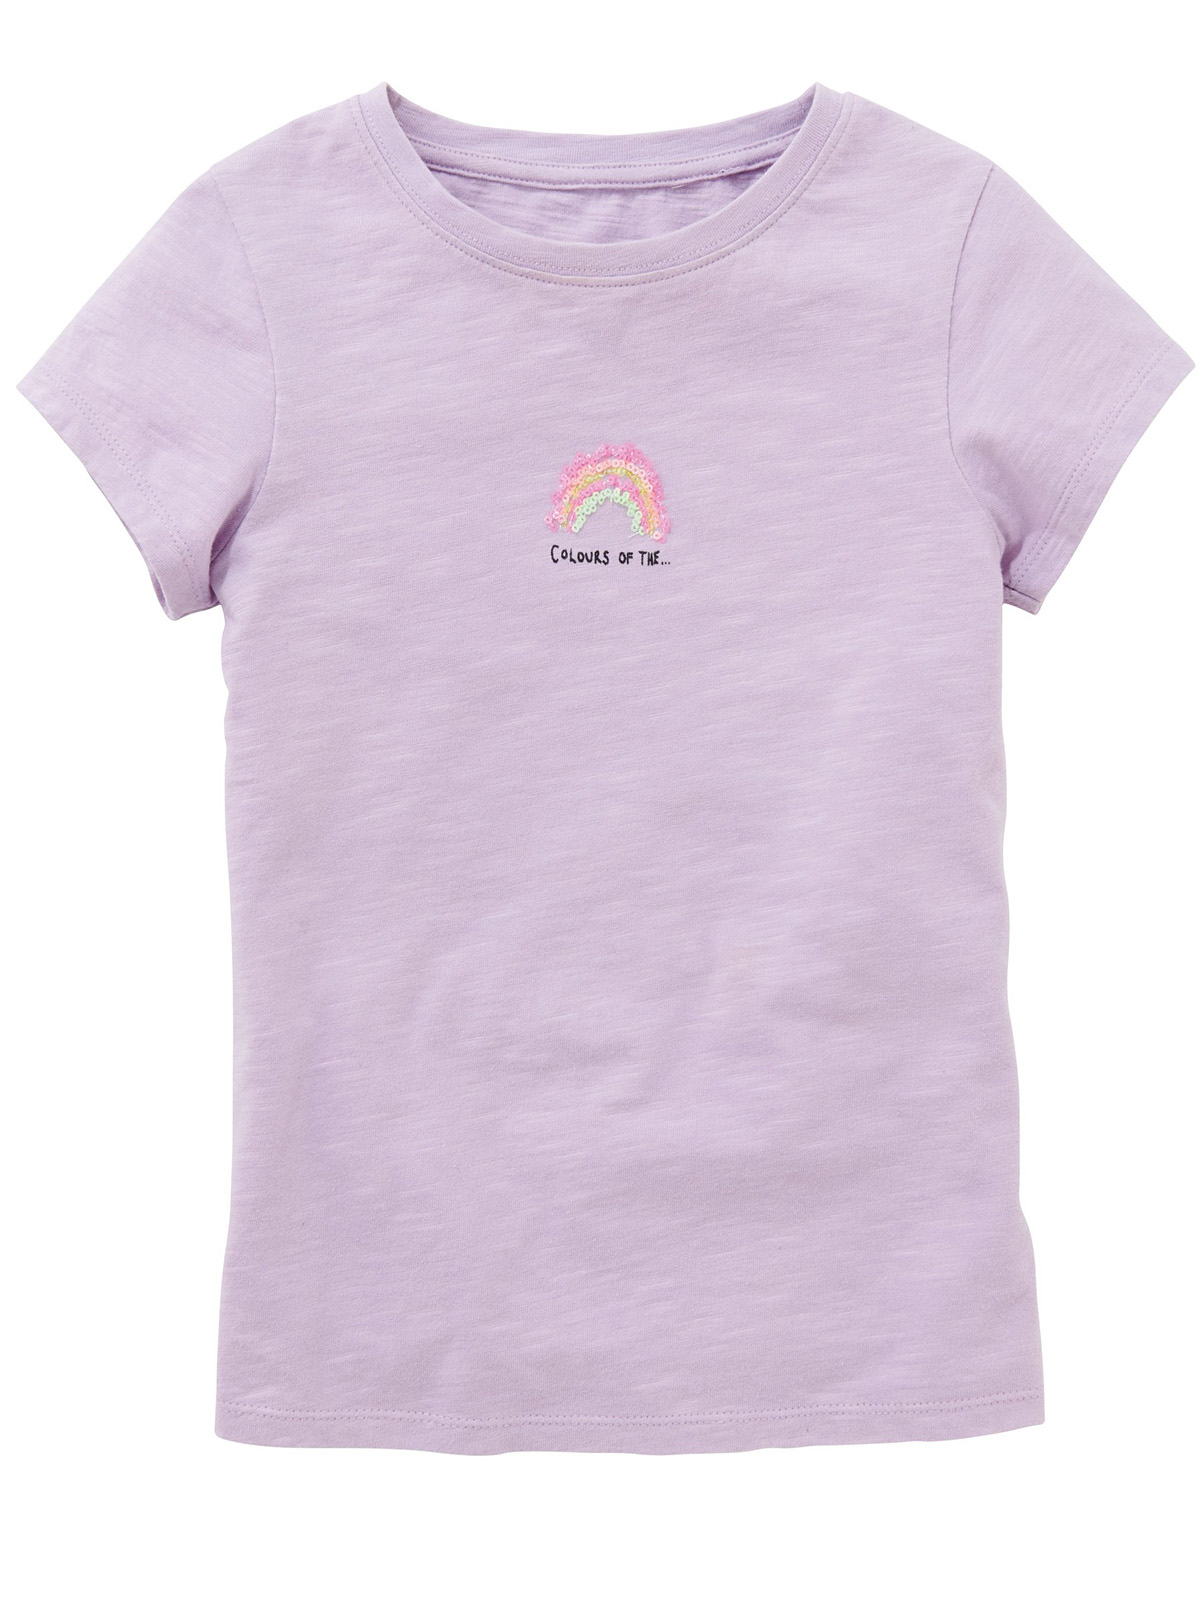 N3XT LILAC Girls Colors Of The Rainbow Sequin Embellished T-Shirt ...